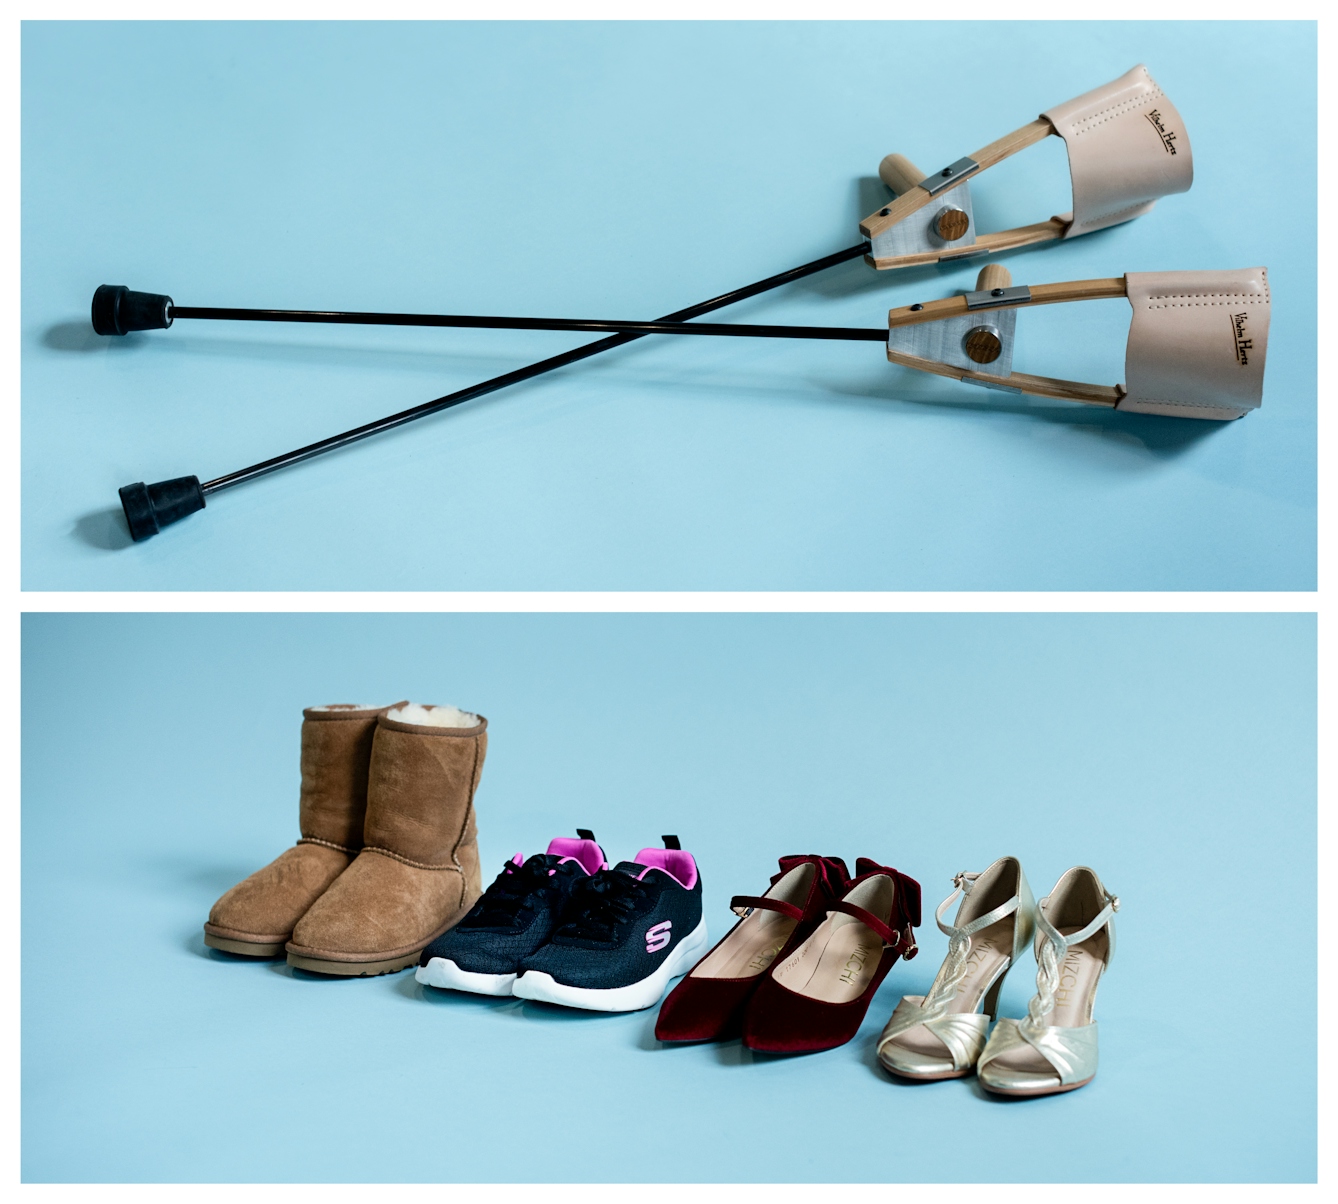 Photographic diptych. The image on the top shows a pair of designer crutches lying on a light blue background, one lain across the other to form a cross. The image on the bottom shows a line of 4 pairs of shoes on a light blue background, from suede ankle boots to trainers, to high heels.